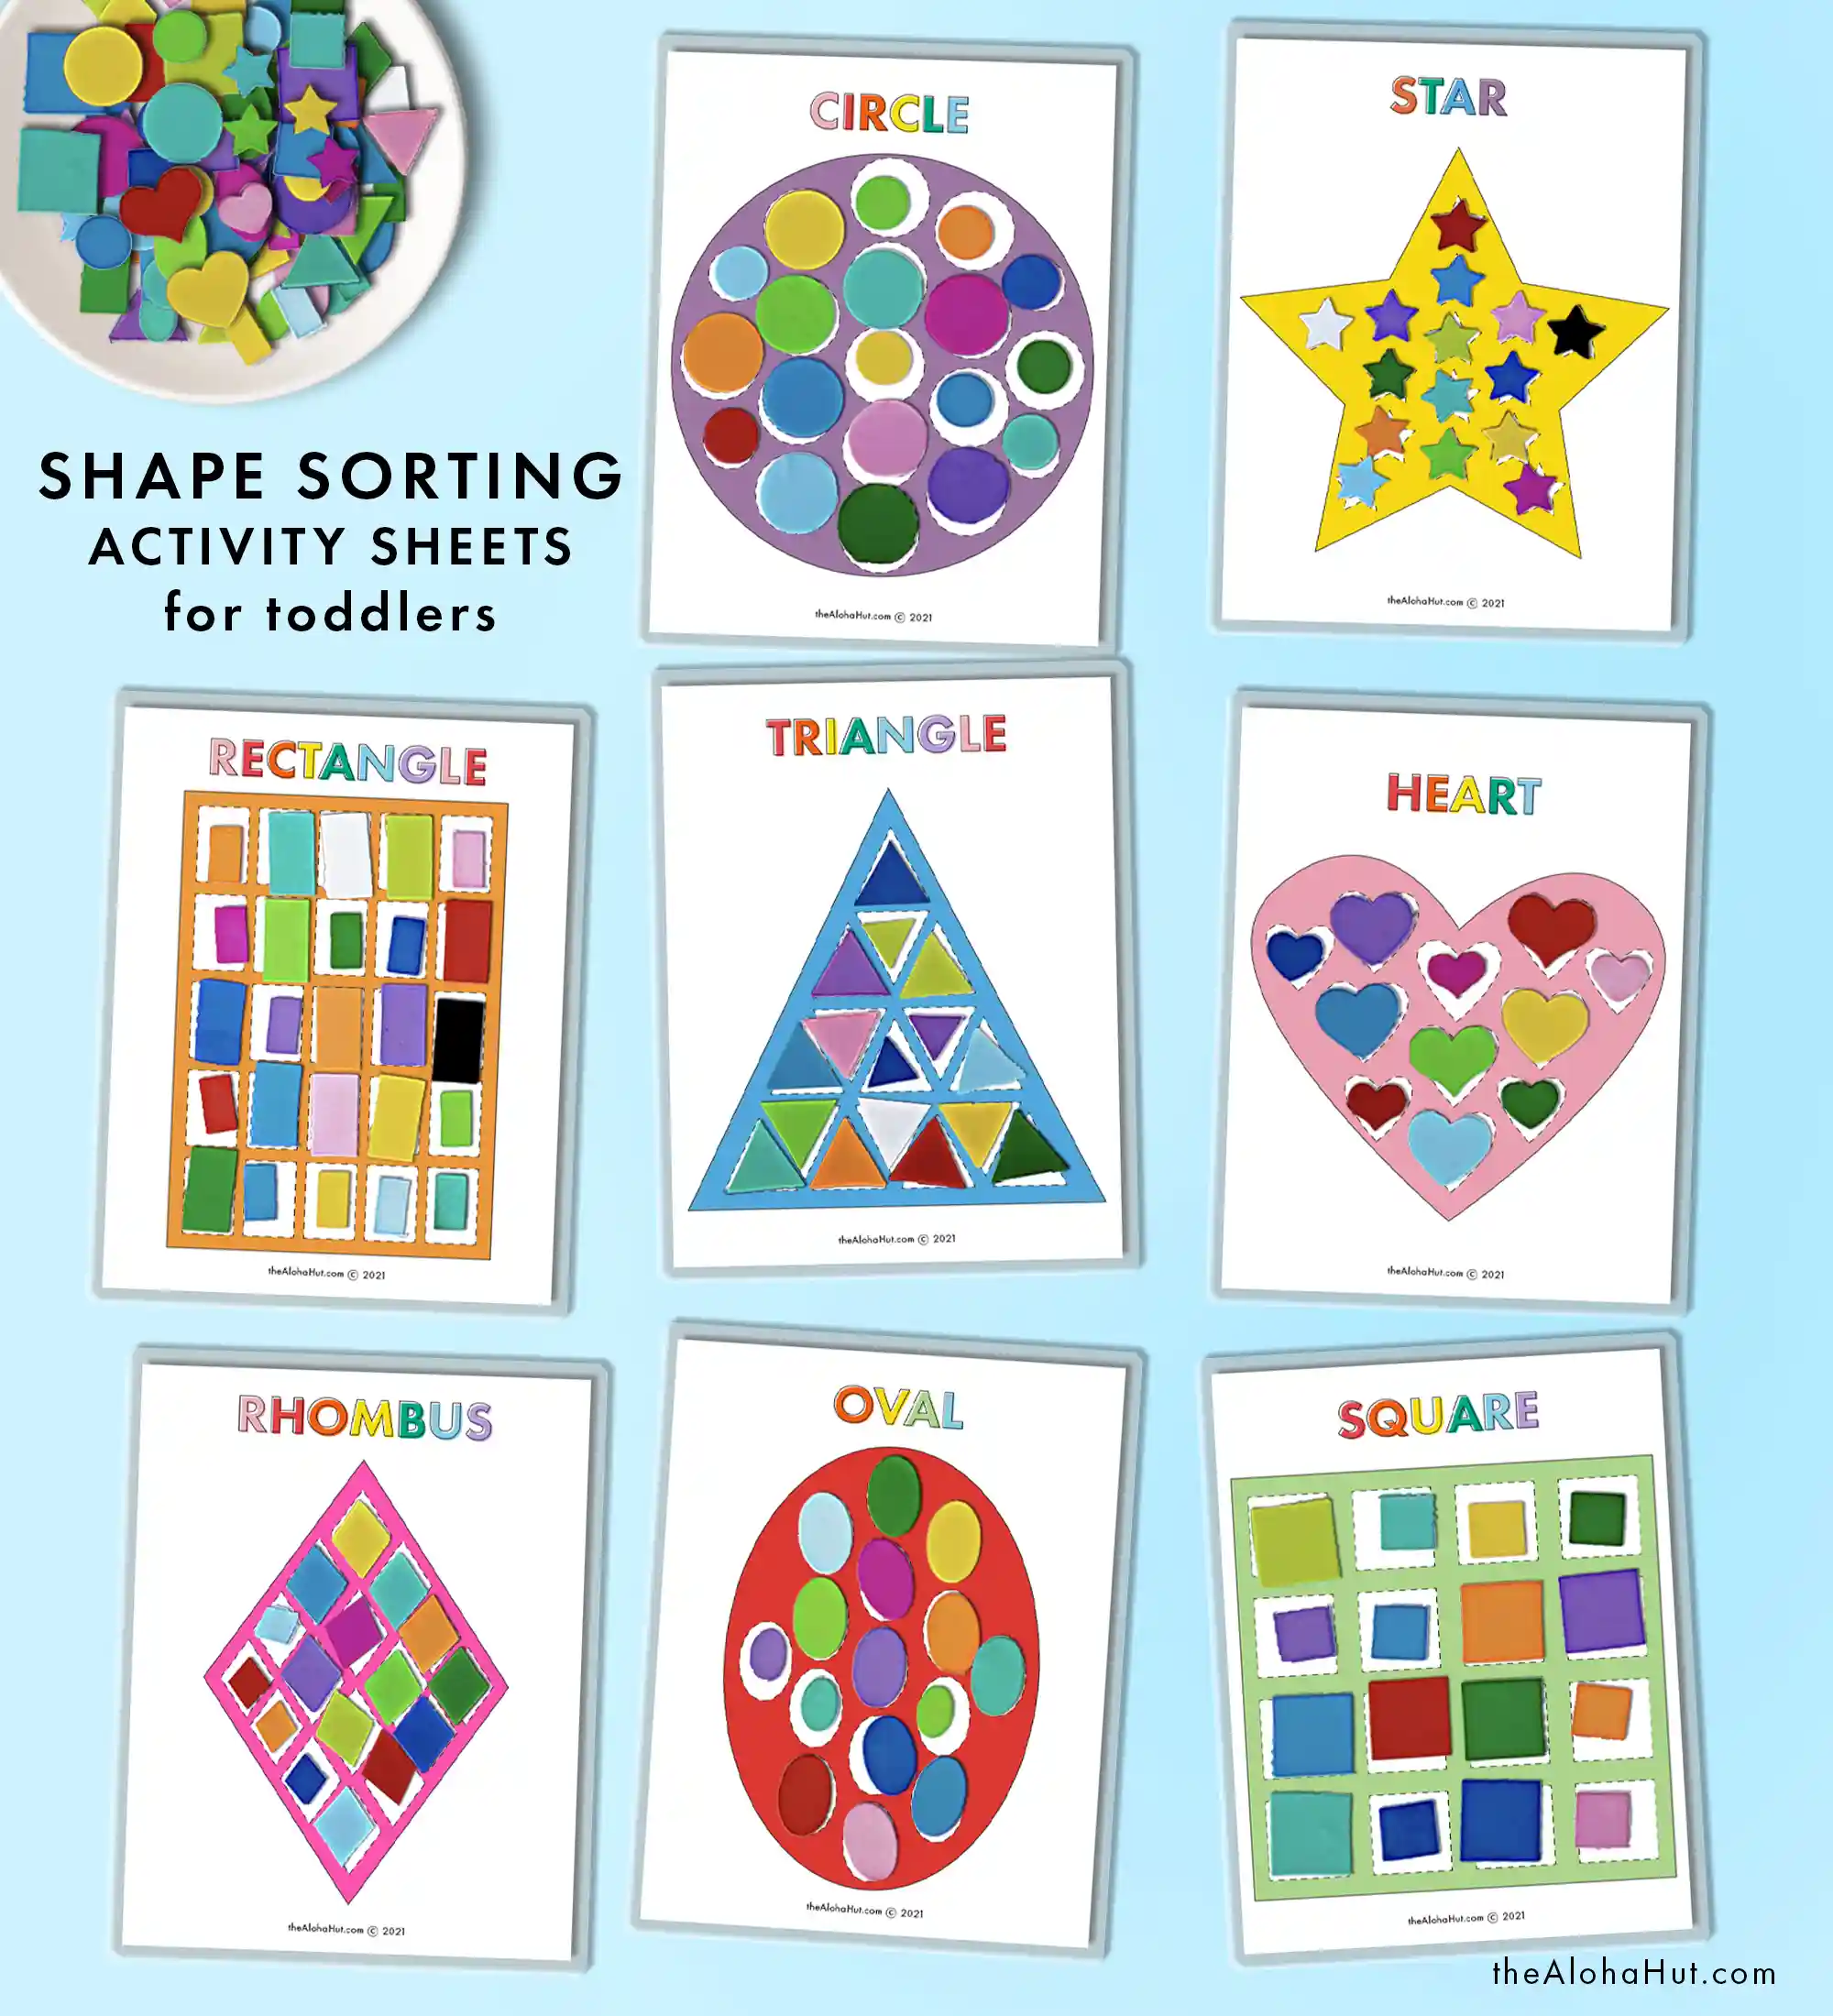 Teach your young children their shapes with these printable shap activity sheets. Includes 8 pages and worksheets to teach your children circle, star, rectangle, triangle, heart, rhombus, oval, and square. Use them as sorting sheets, playdough mats, or let your children draw on them and count the shapes.